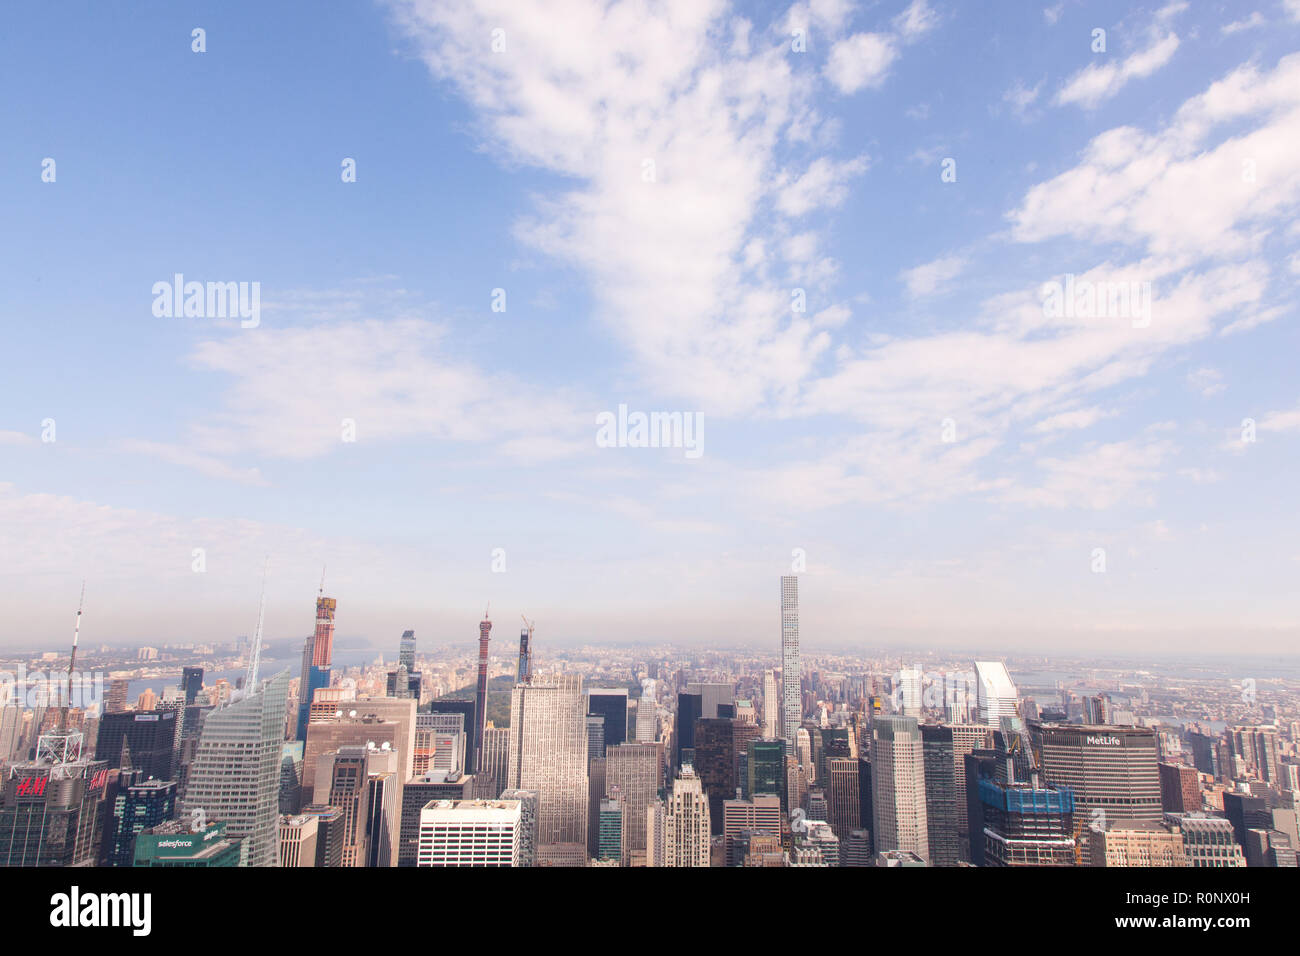 View from the top of the Empire State Building, Manhattan, New York City, United States of America. Stock Photo